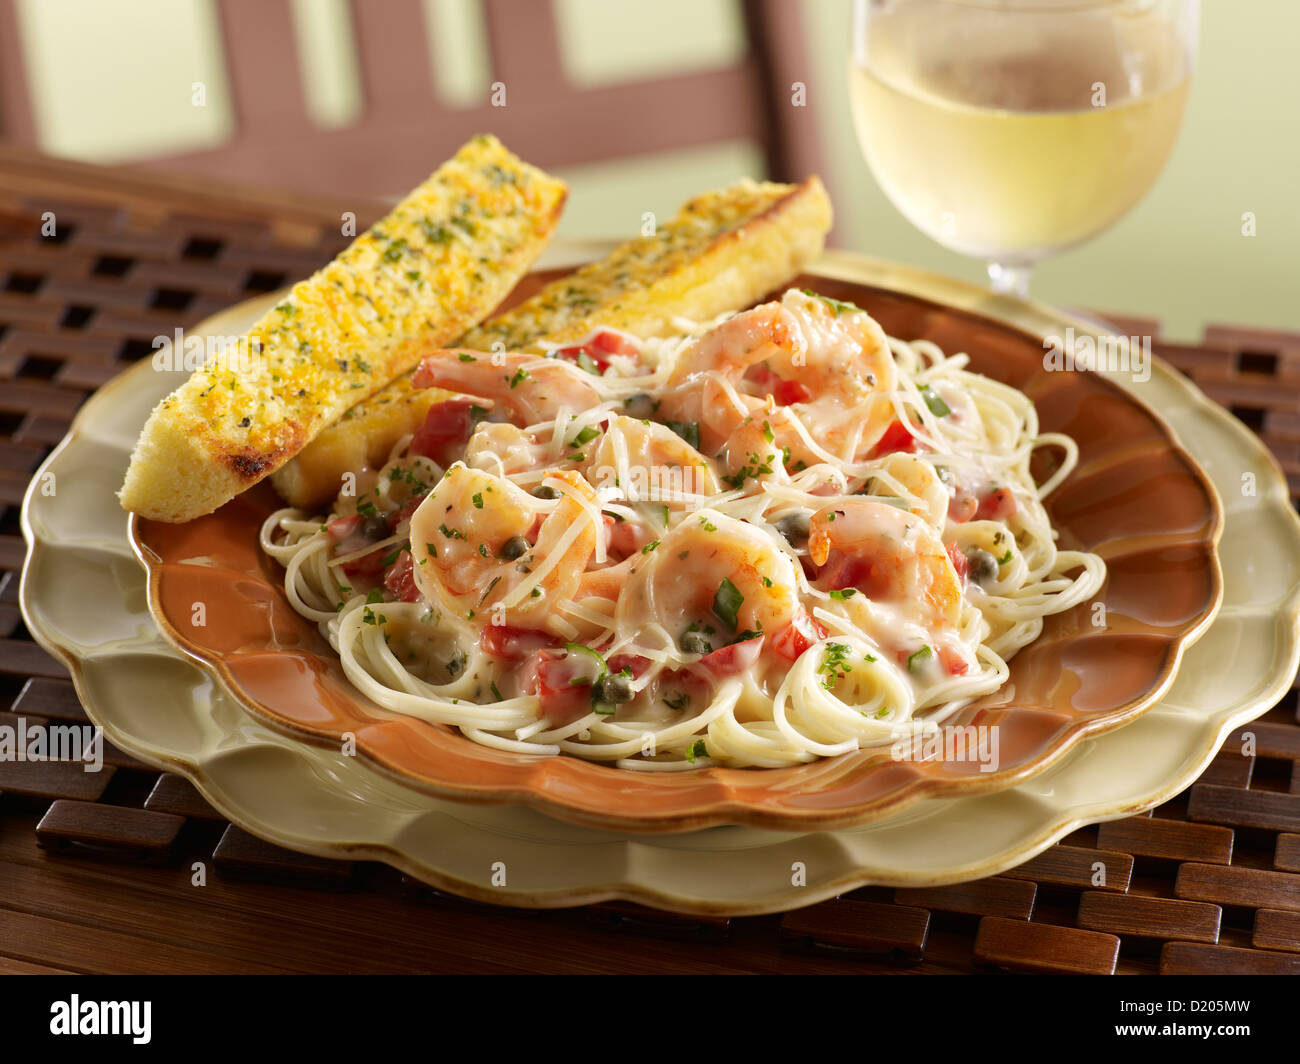 Shrimp Scampi Pasta Dinner with White Wine and Garlic Bread Stock Photo